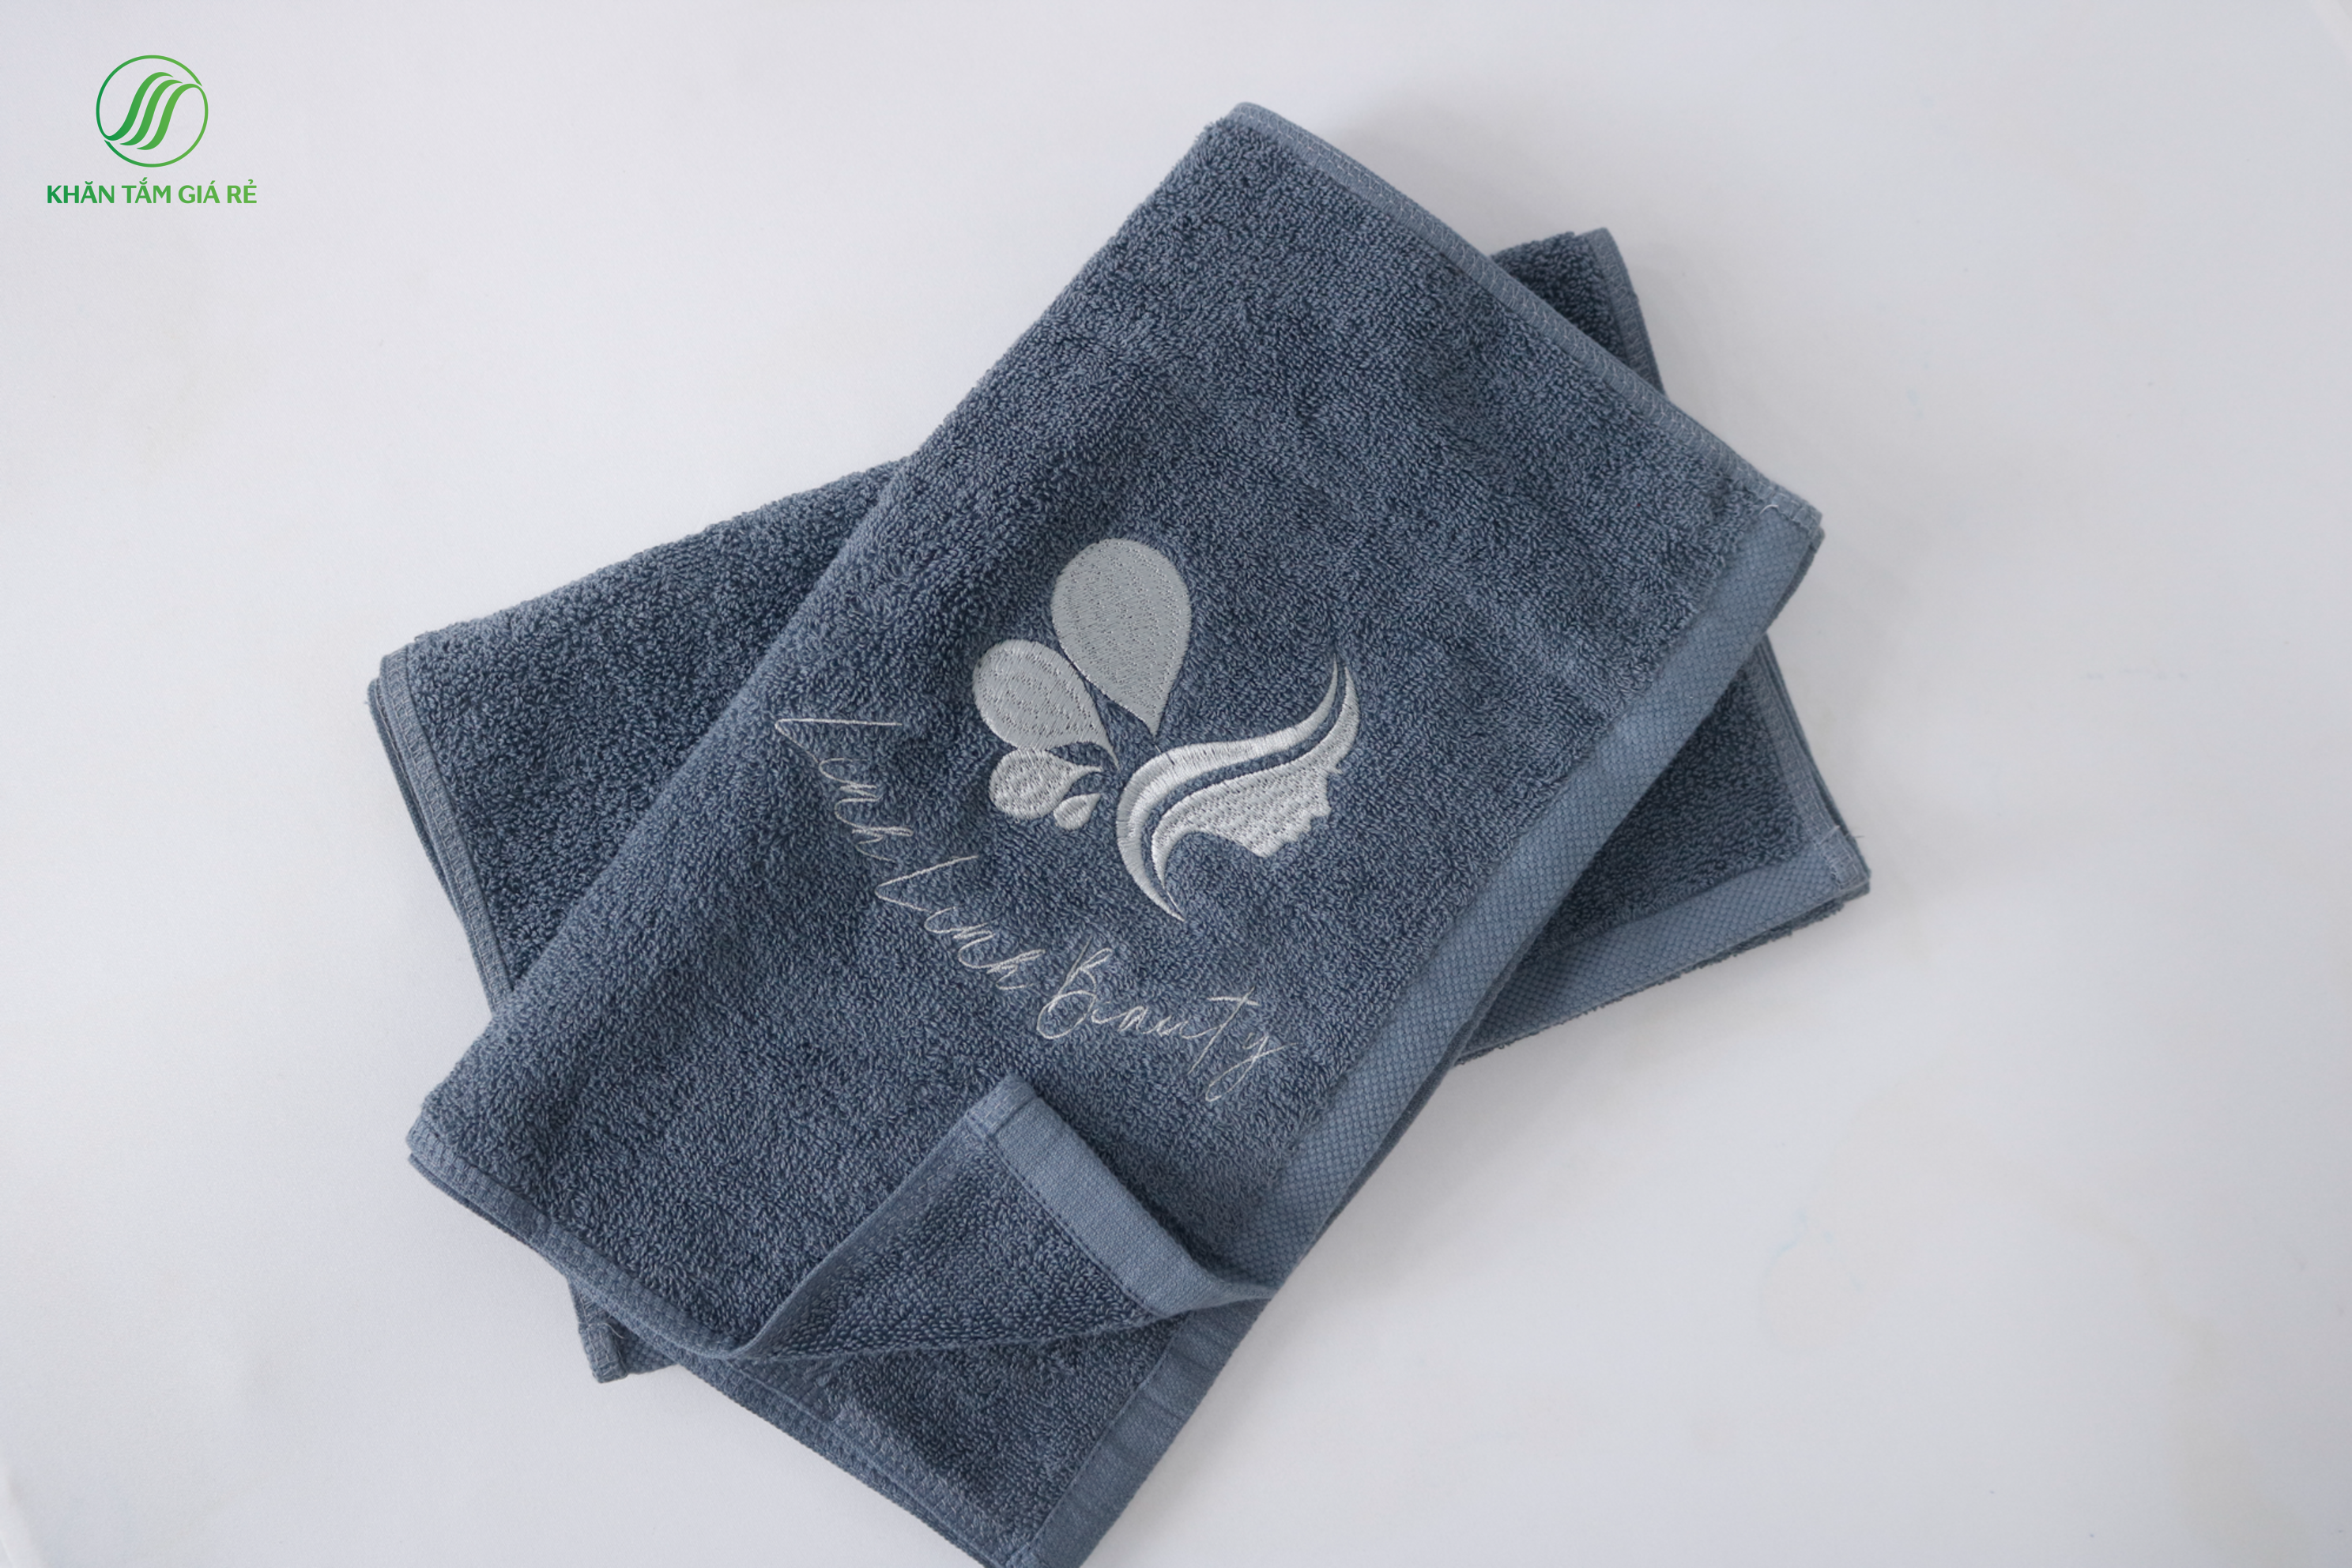 Cotton towel is an indispensable component in every resort, hotel, resort, the chain spa business premium.